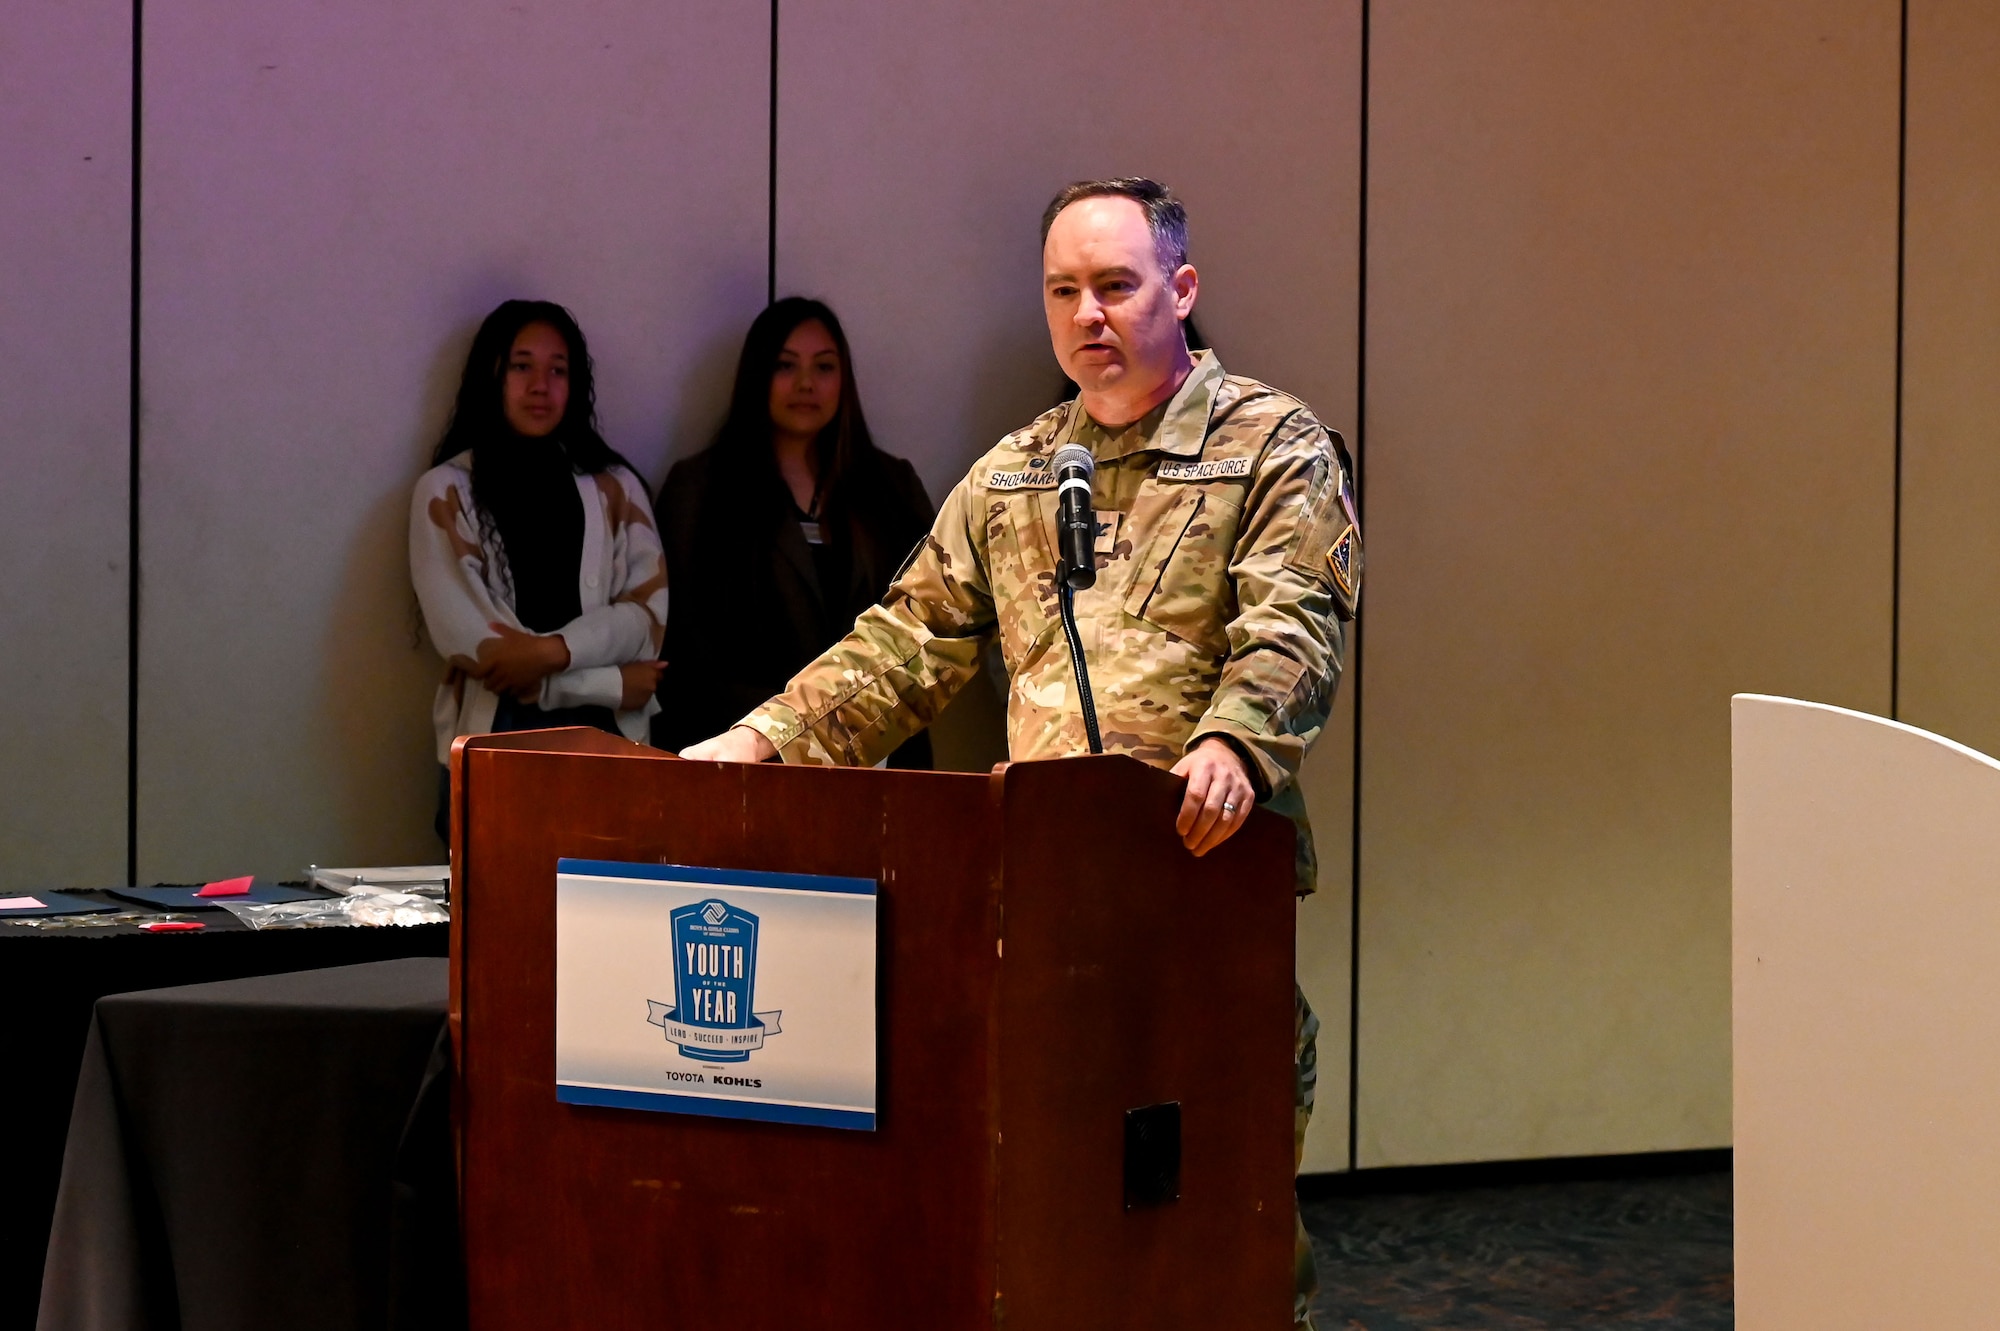 Col. Shoemaker delivers a speech at a podium.